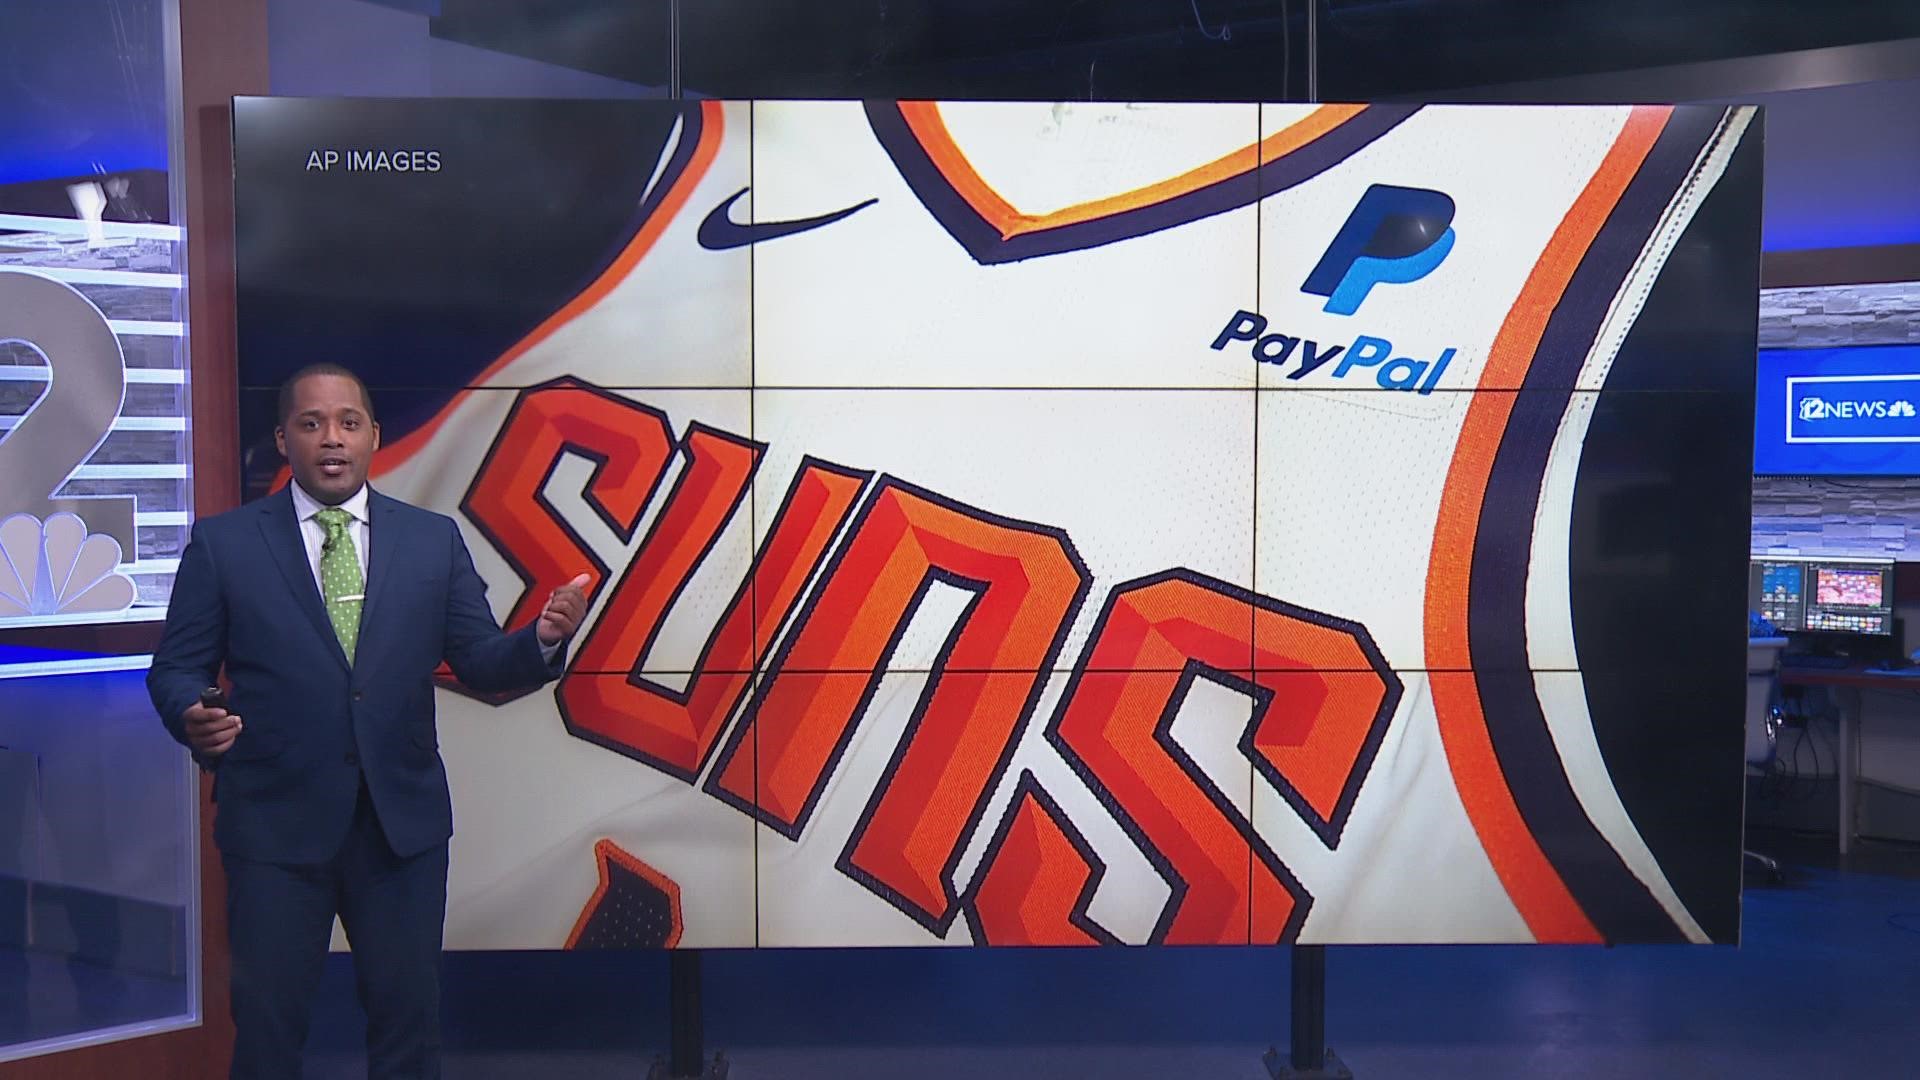 The CEO of PayPal said Friday they will cut ties with the Phoenix Suns if Robert Sarver remains with the NBA team.